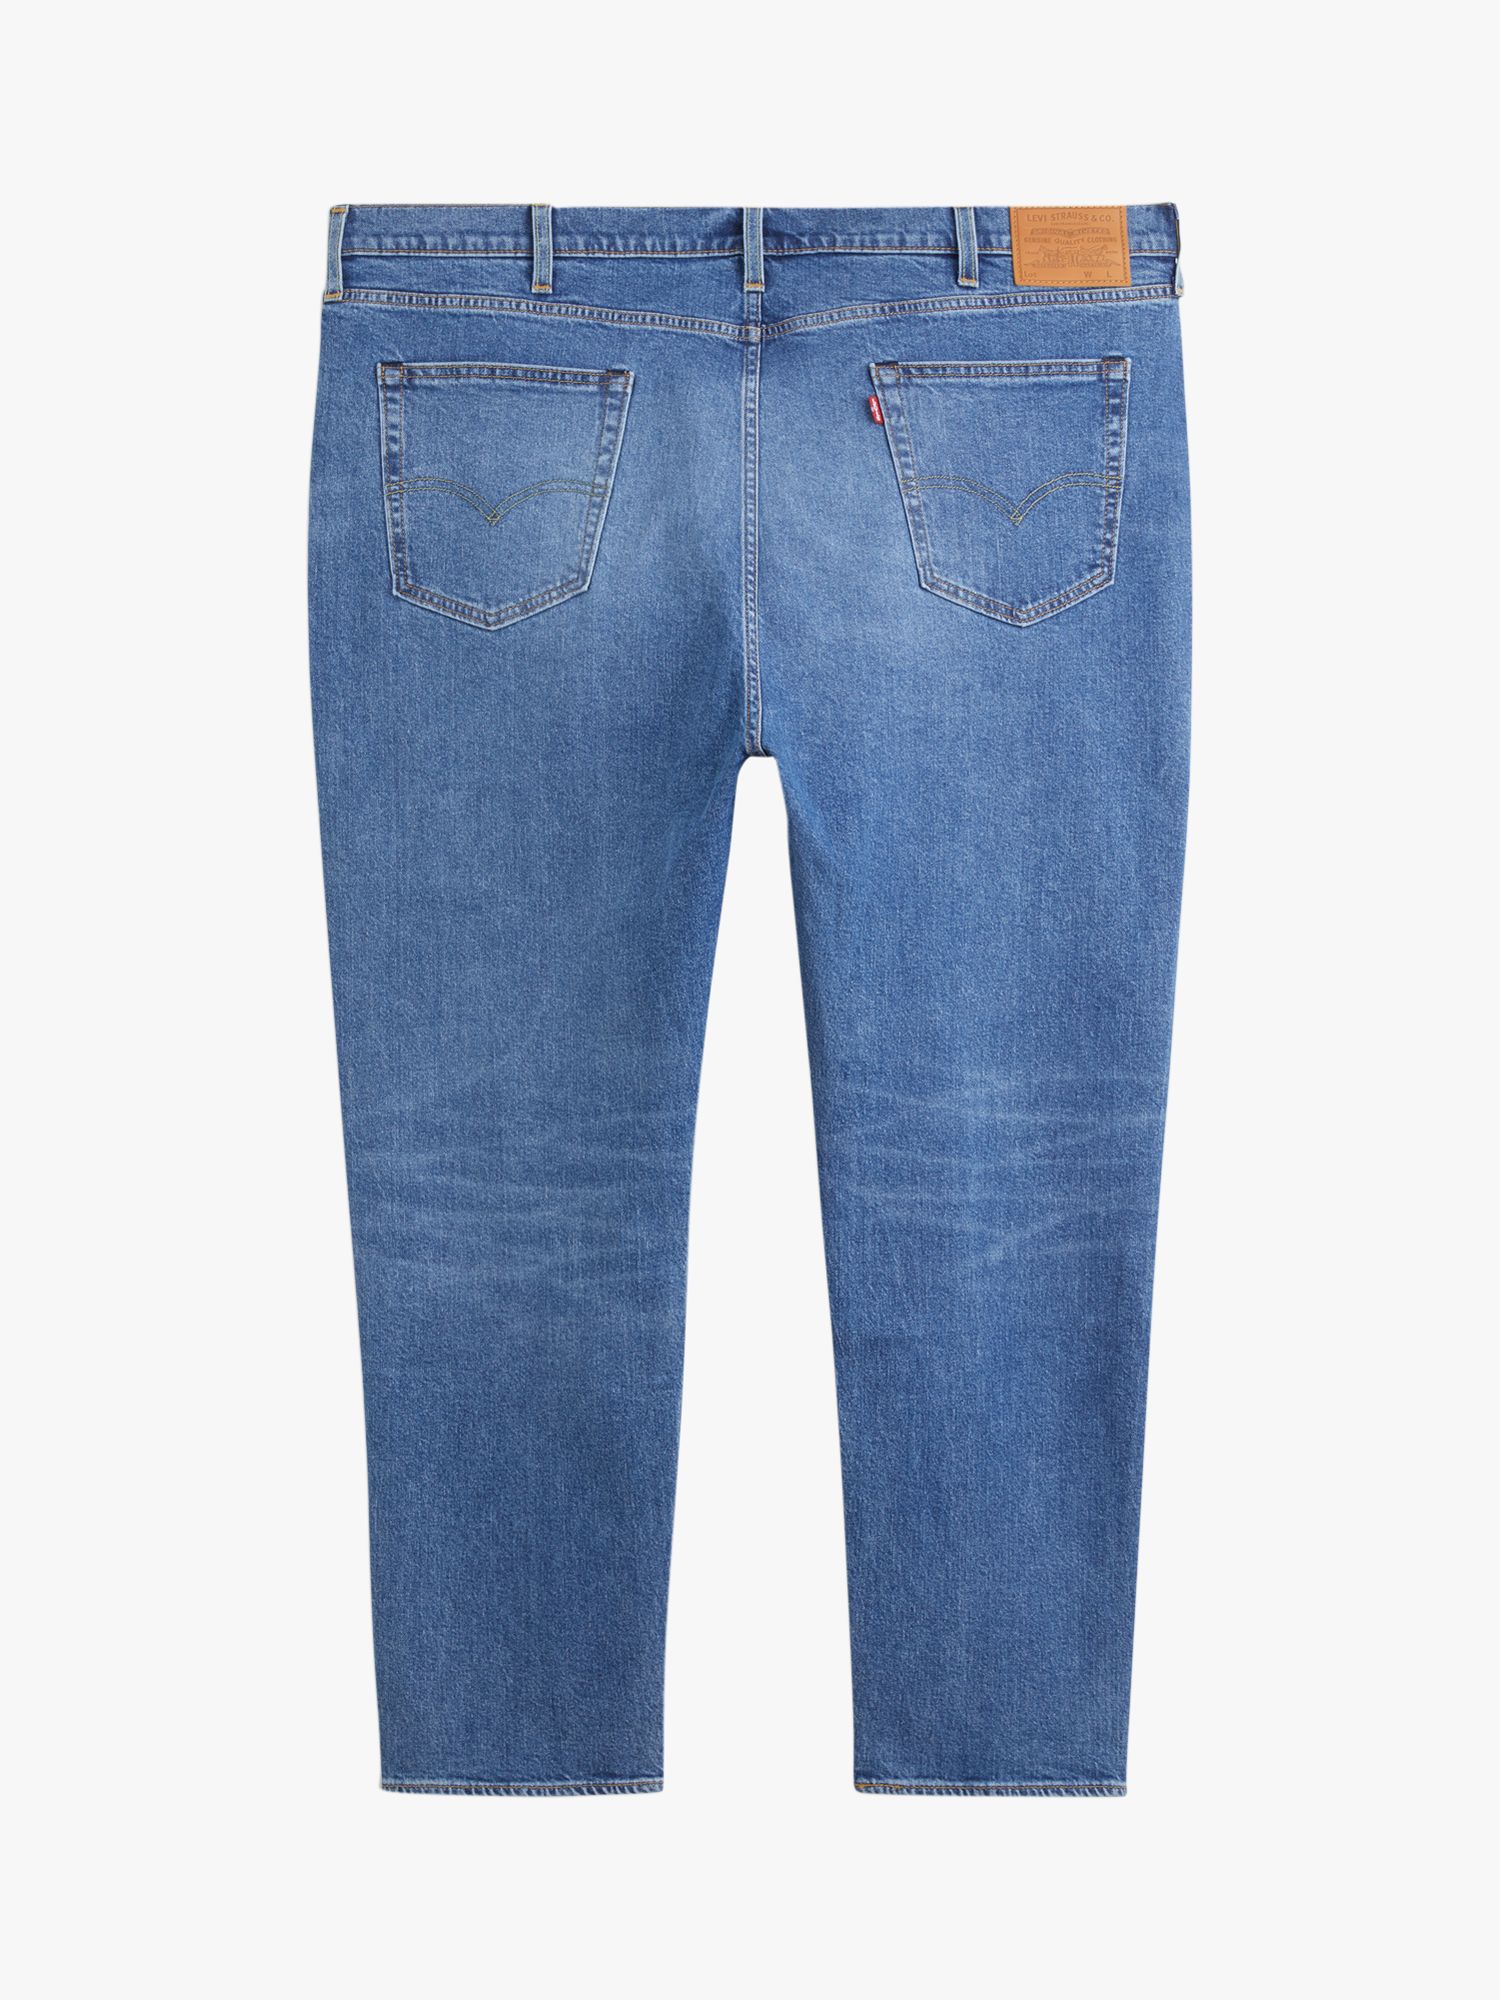 Levi's Big & Tall 512 Slim Tapered Jeans, Blue at John Lewis & Partners